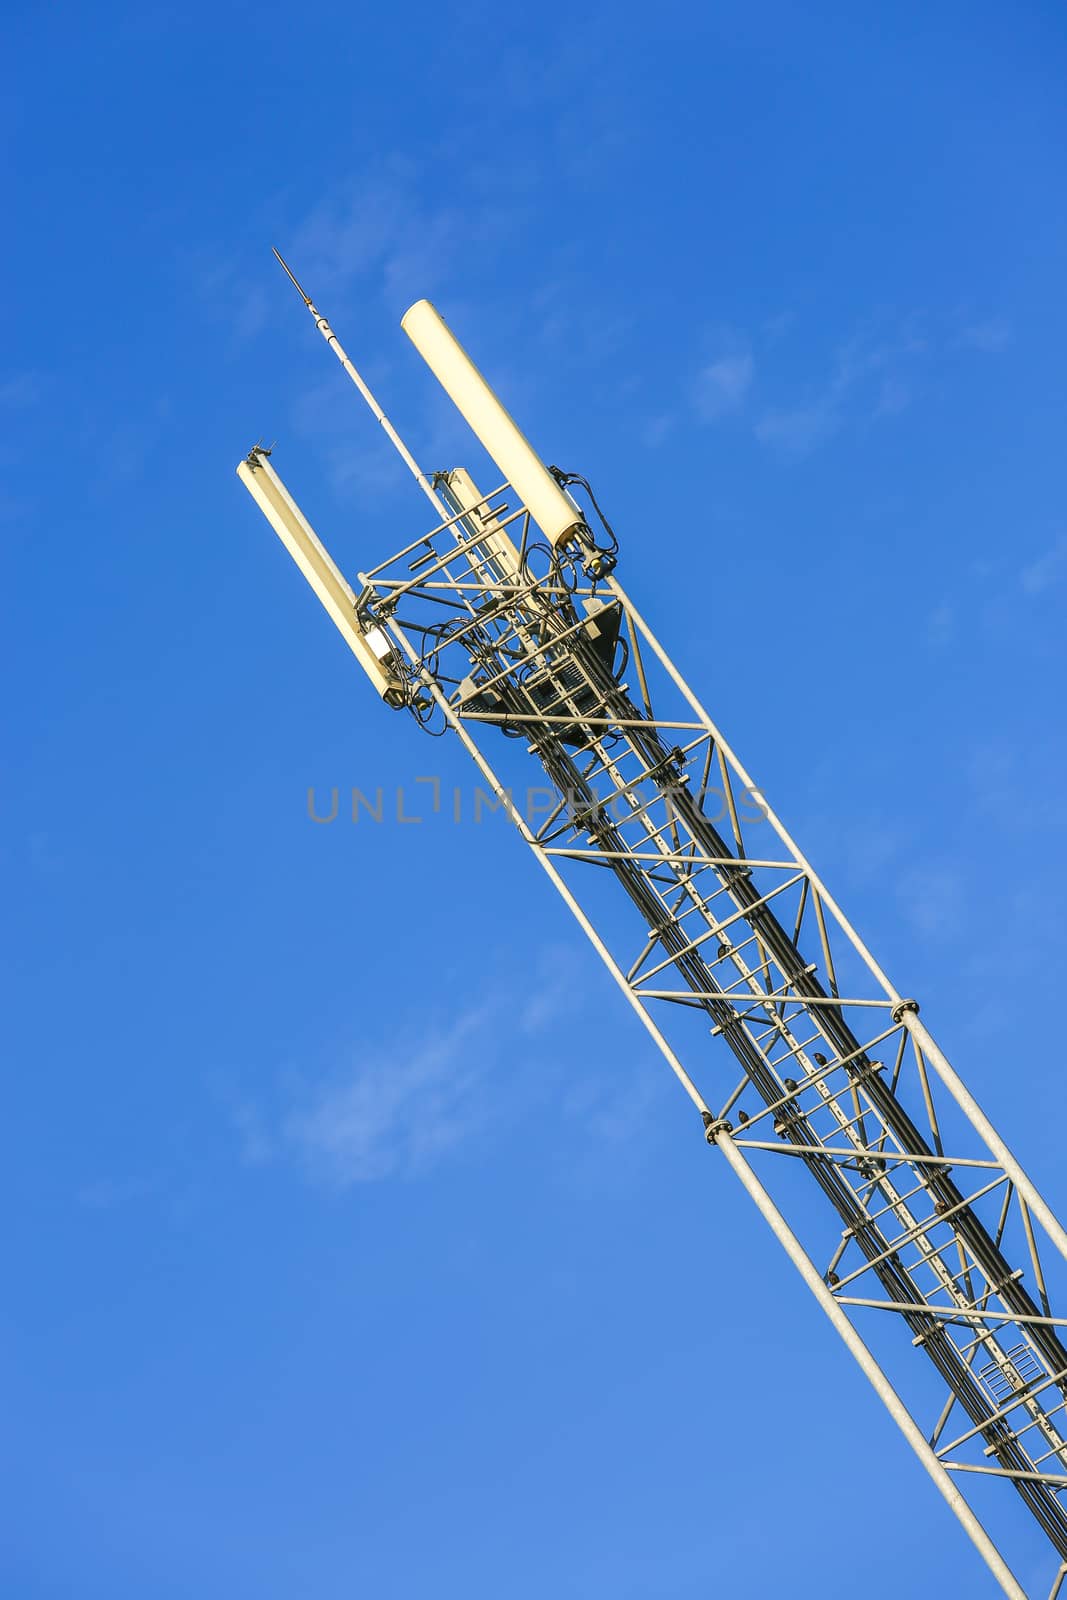 A high telecommunication network antenna and the beautiful clear blue sky